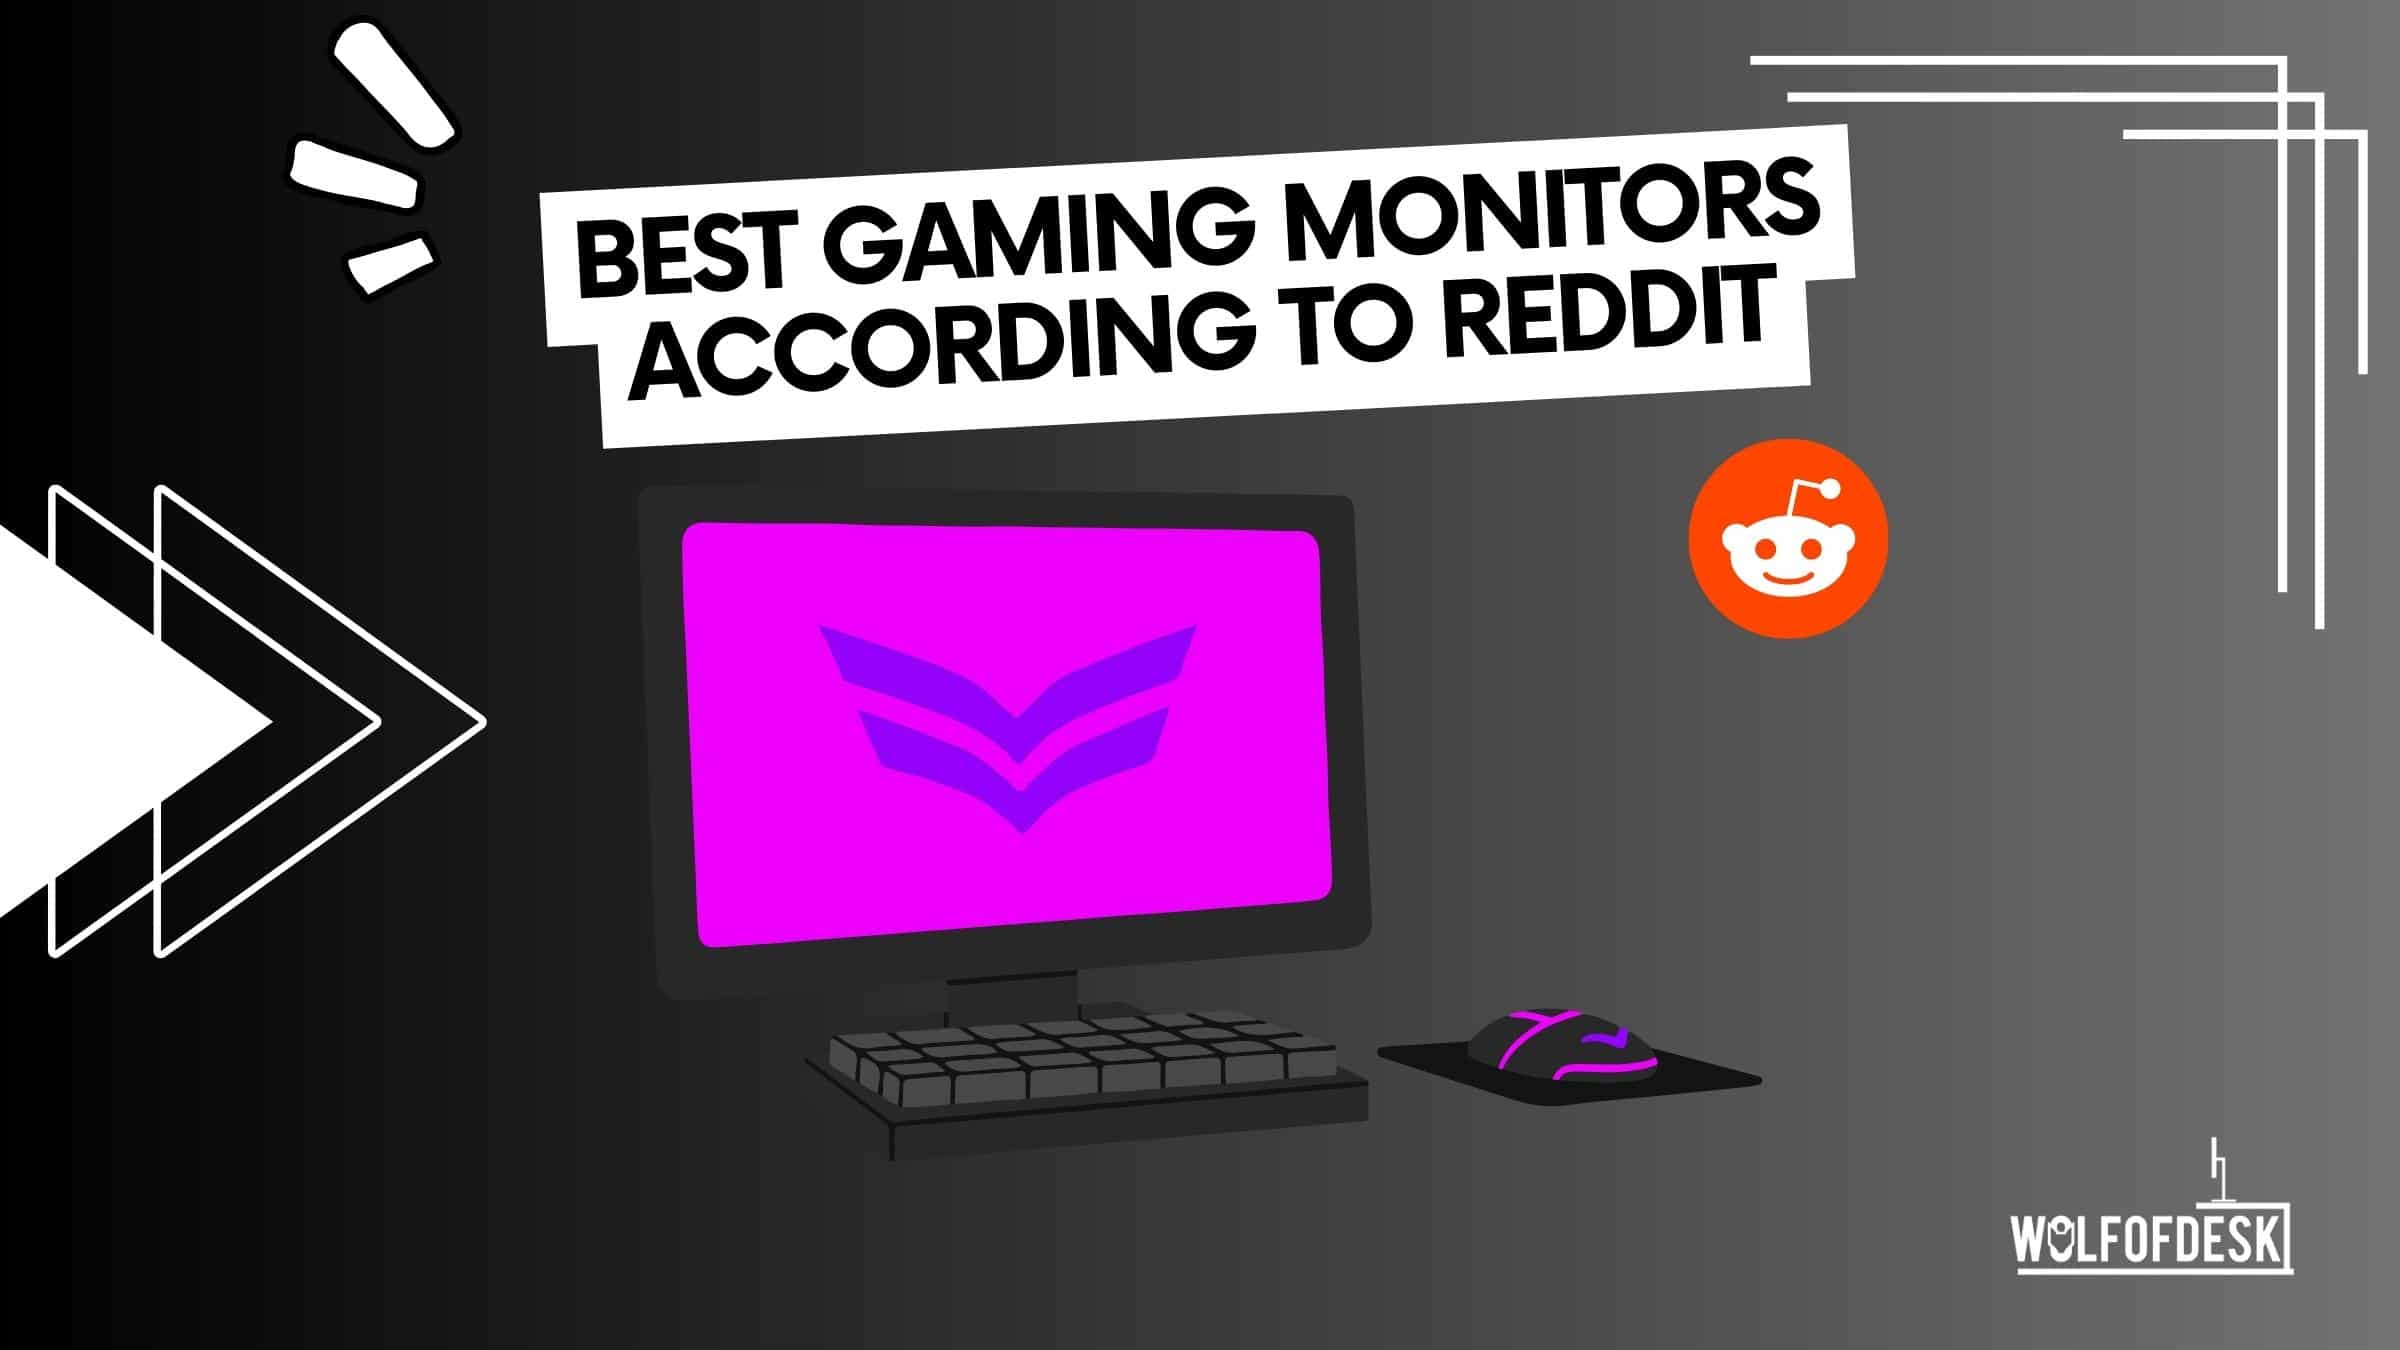 best gaming monitors according to reddit users